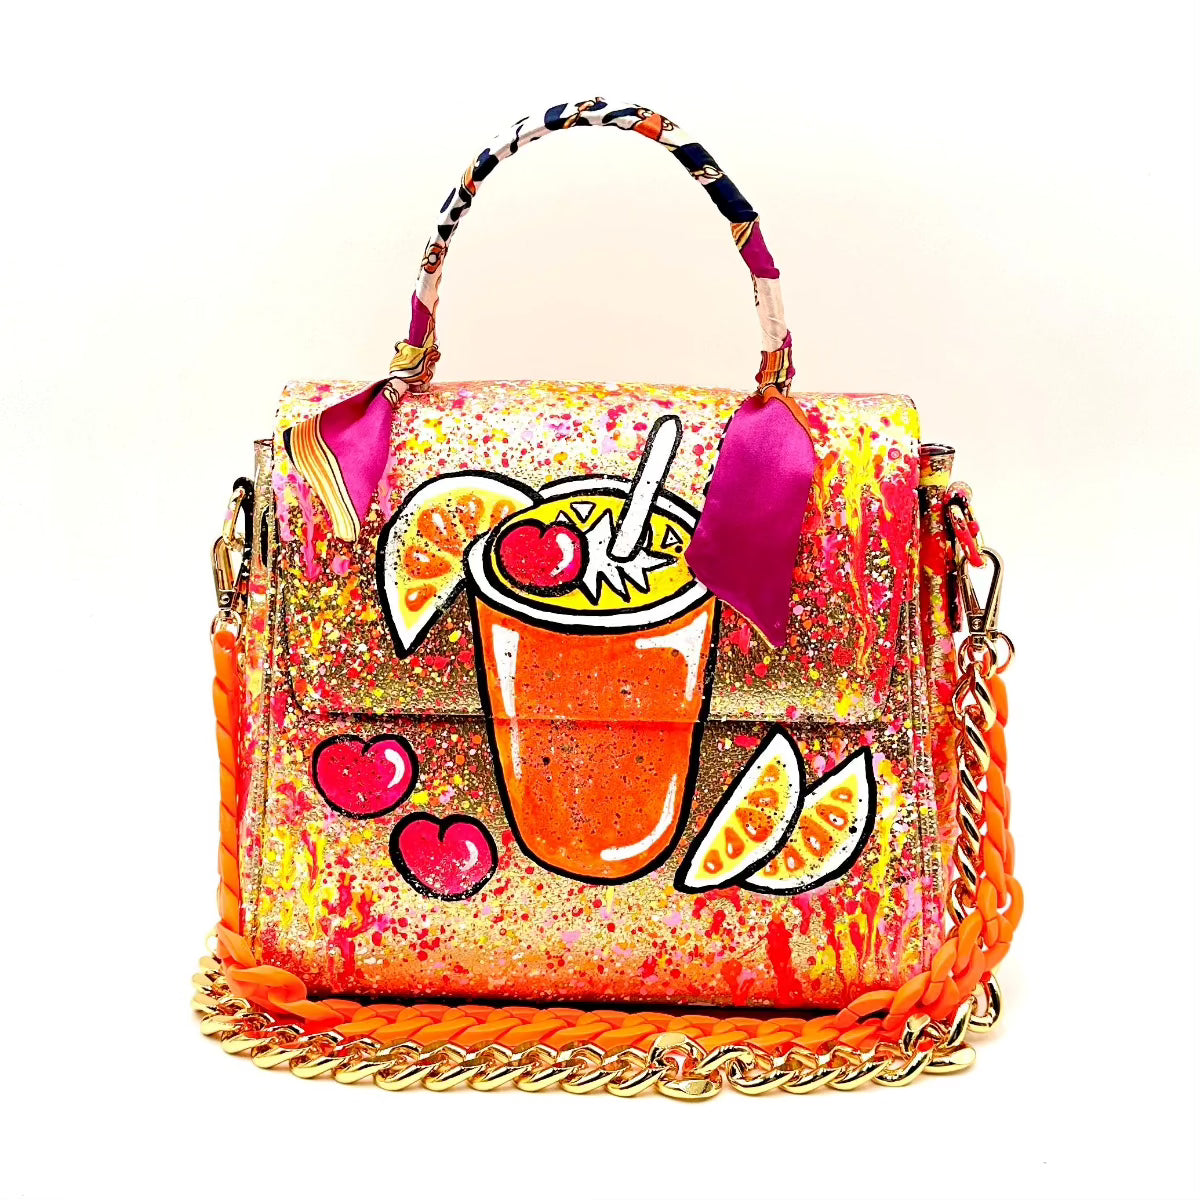 Anca Barbu Vicky Bag, Cocktail with Cherries and Oranges